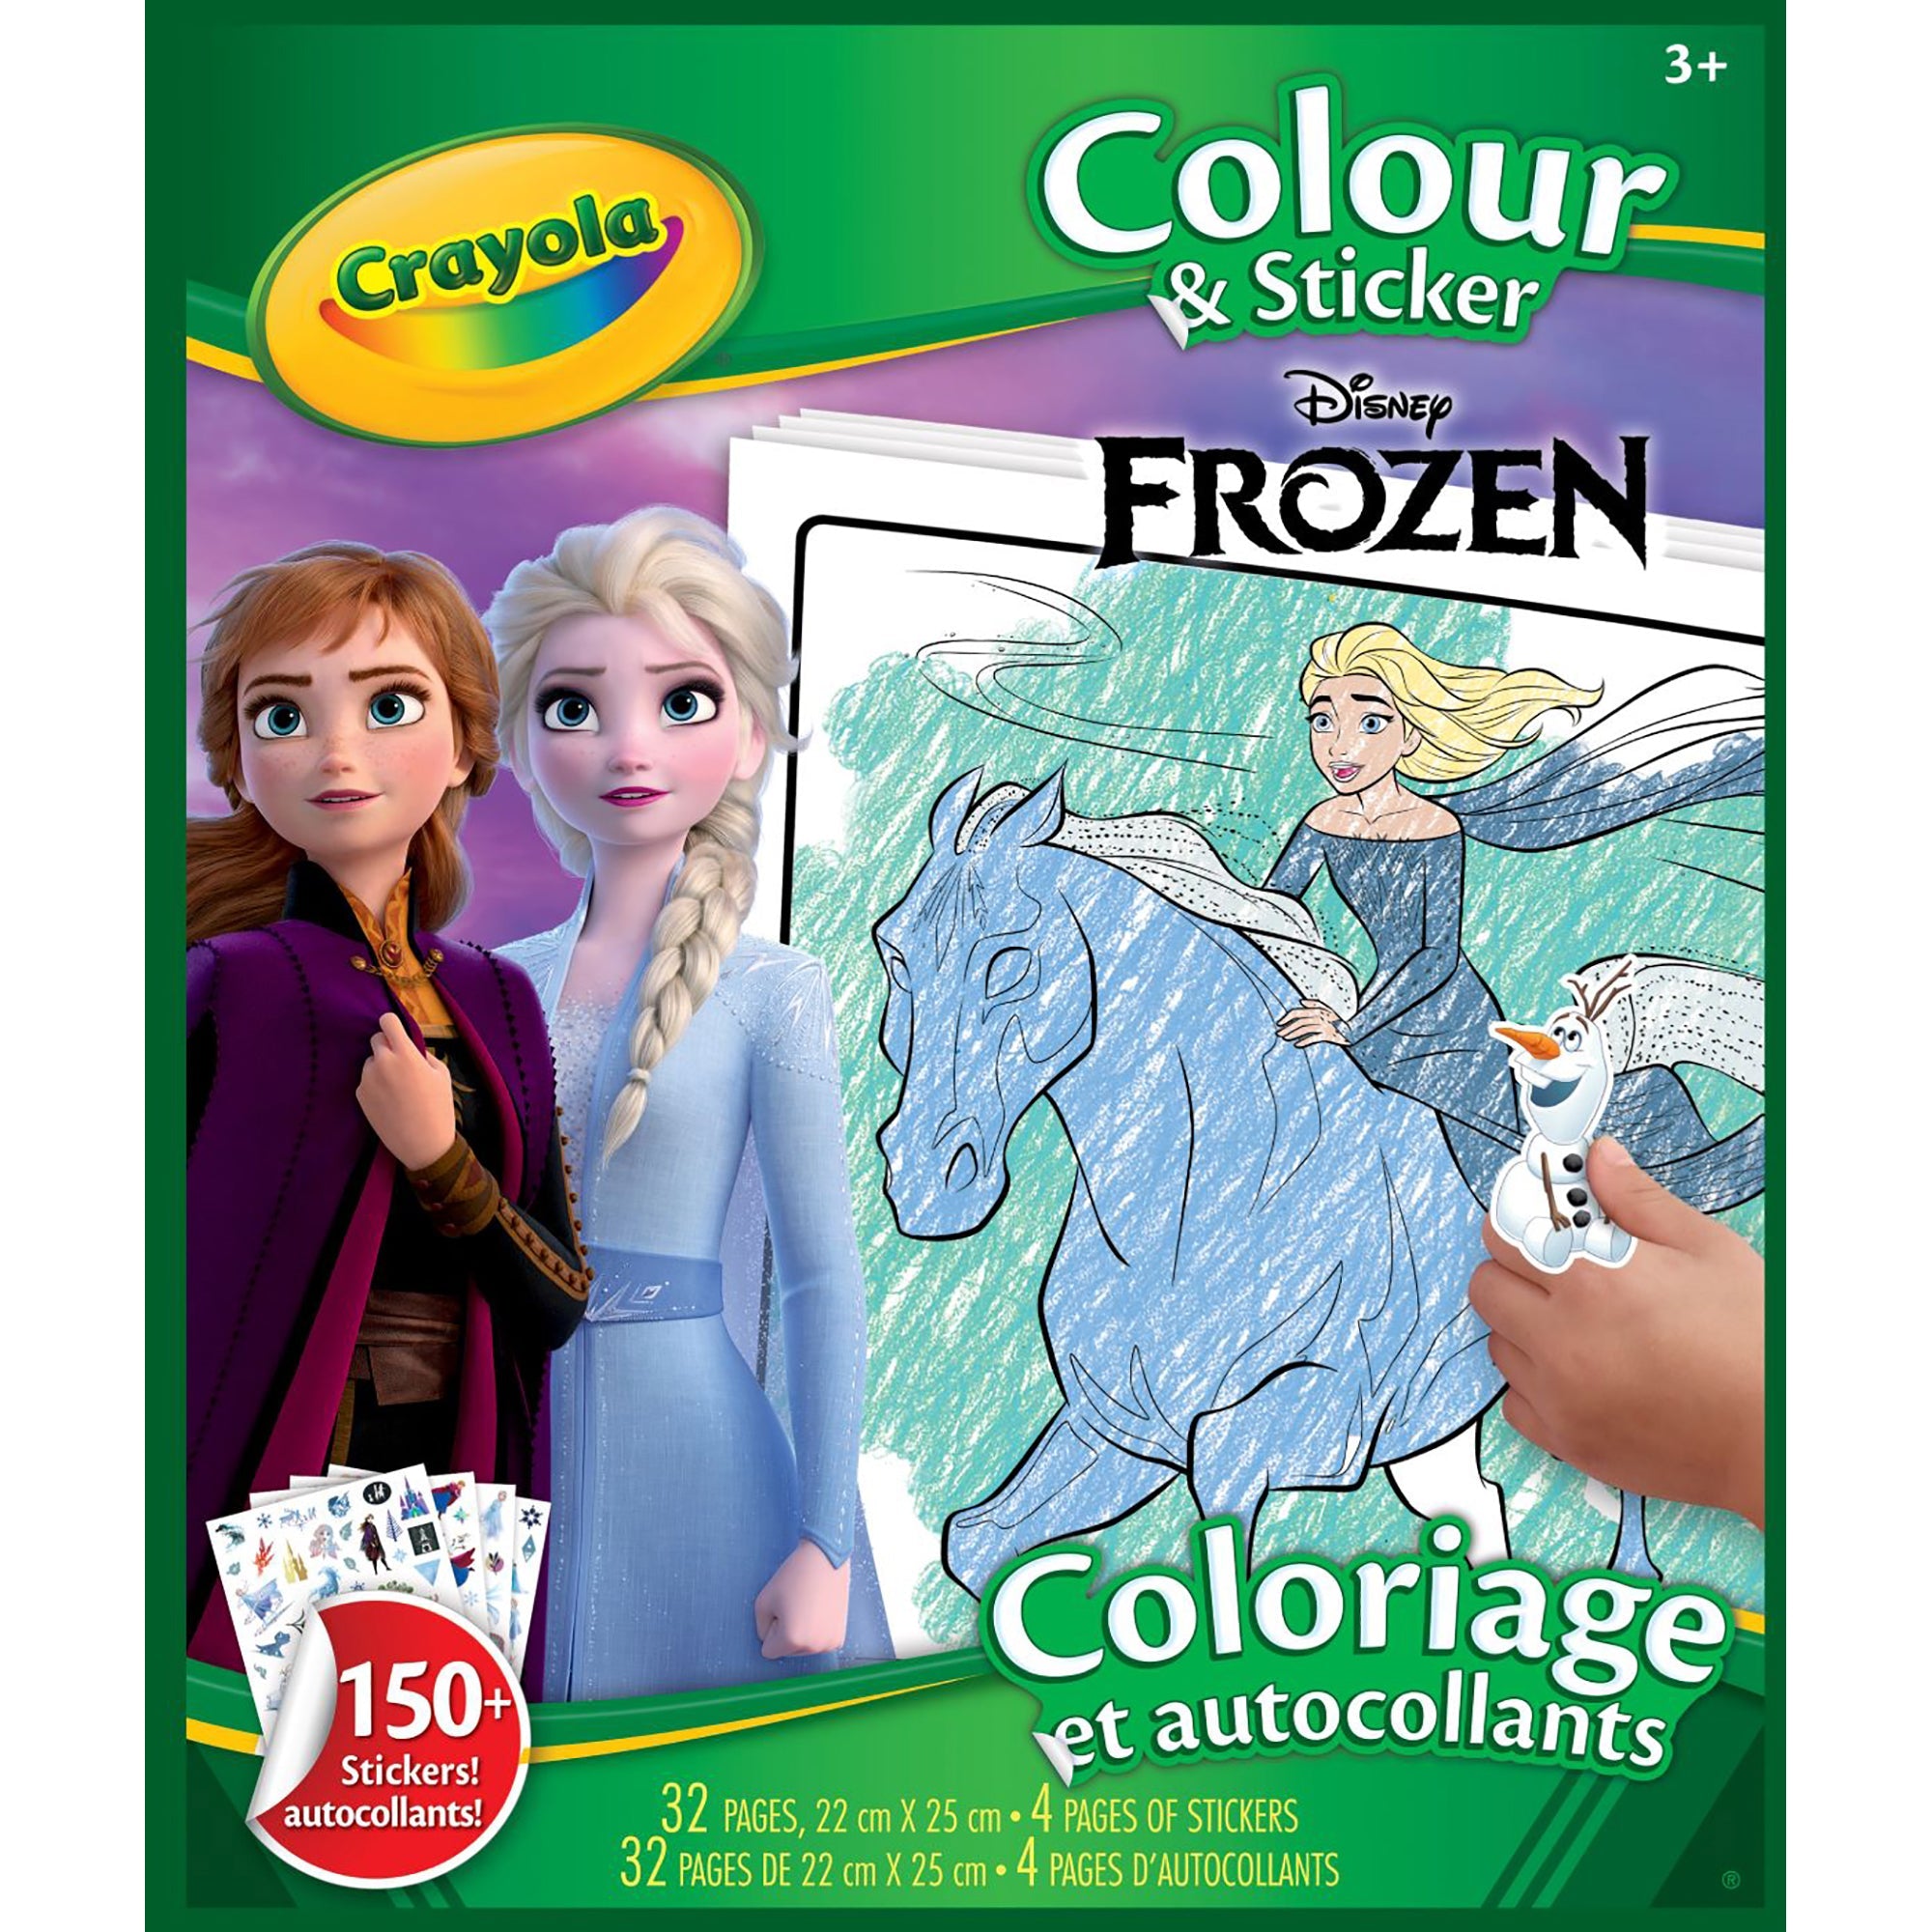 Crayola Frozen Color and Sticker Book - 32 Pages - 150+ Stickers 8.6x9.8in (22x25cm)